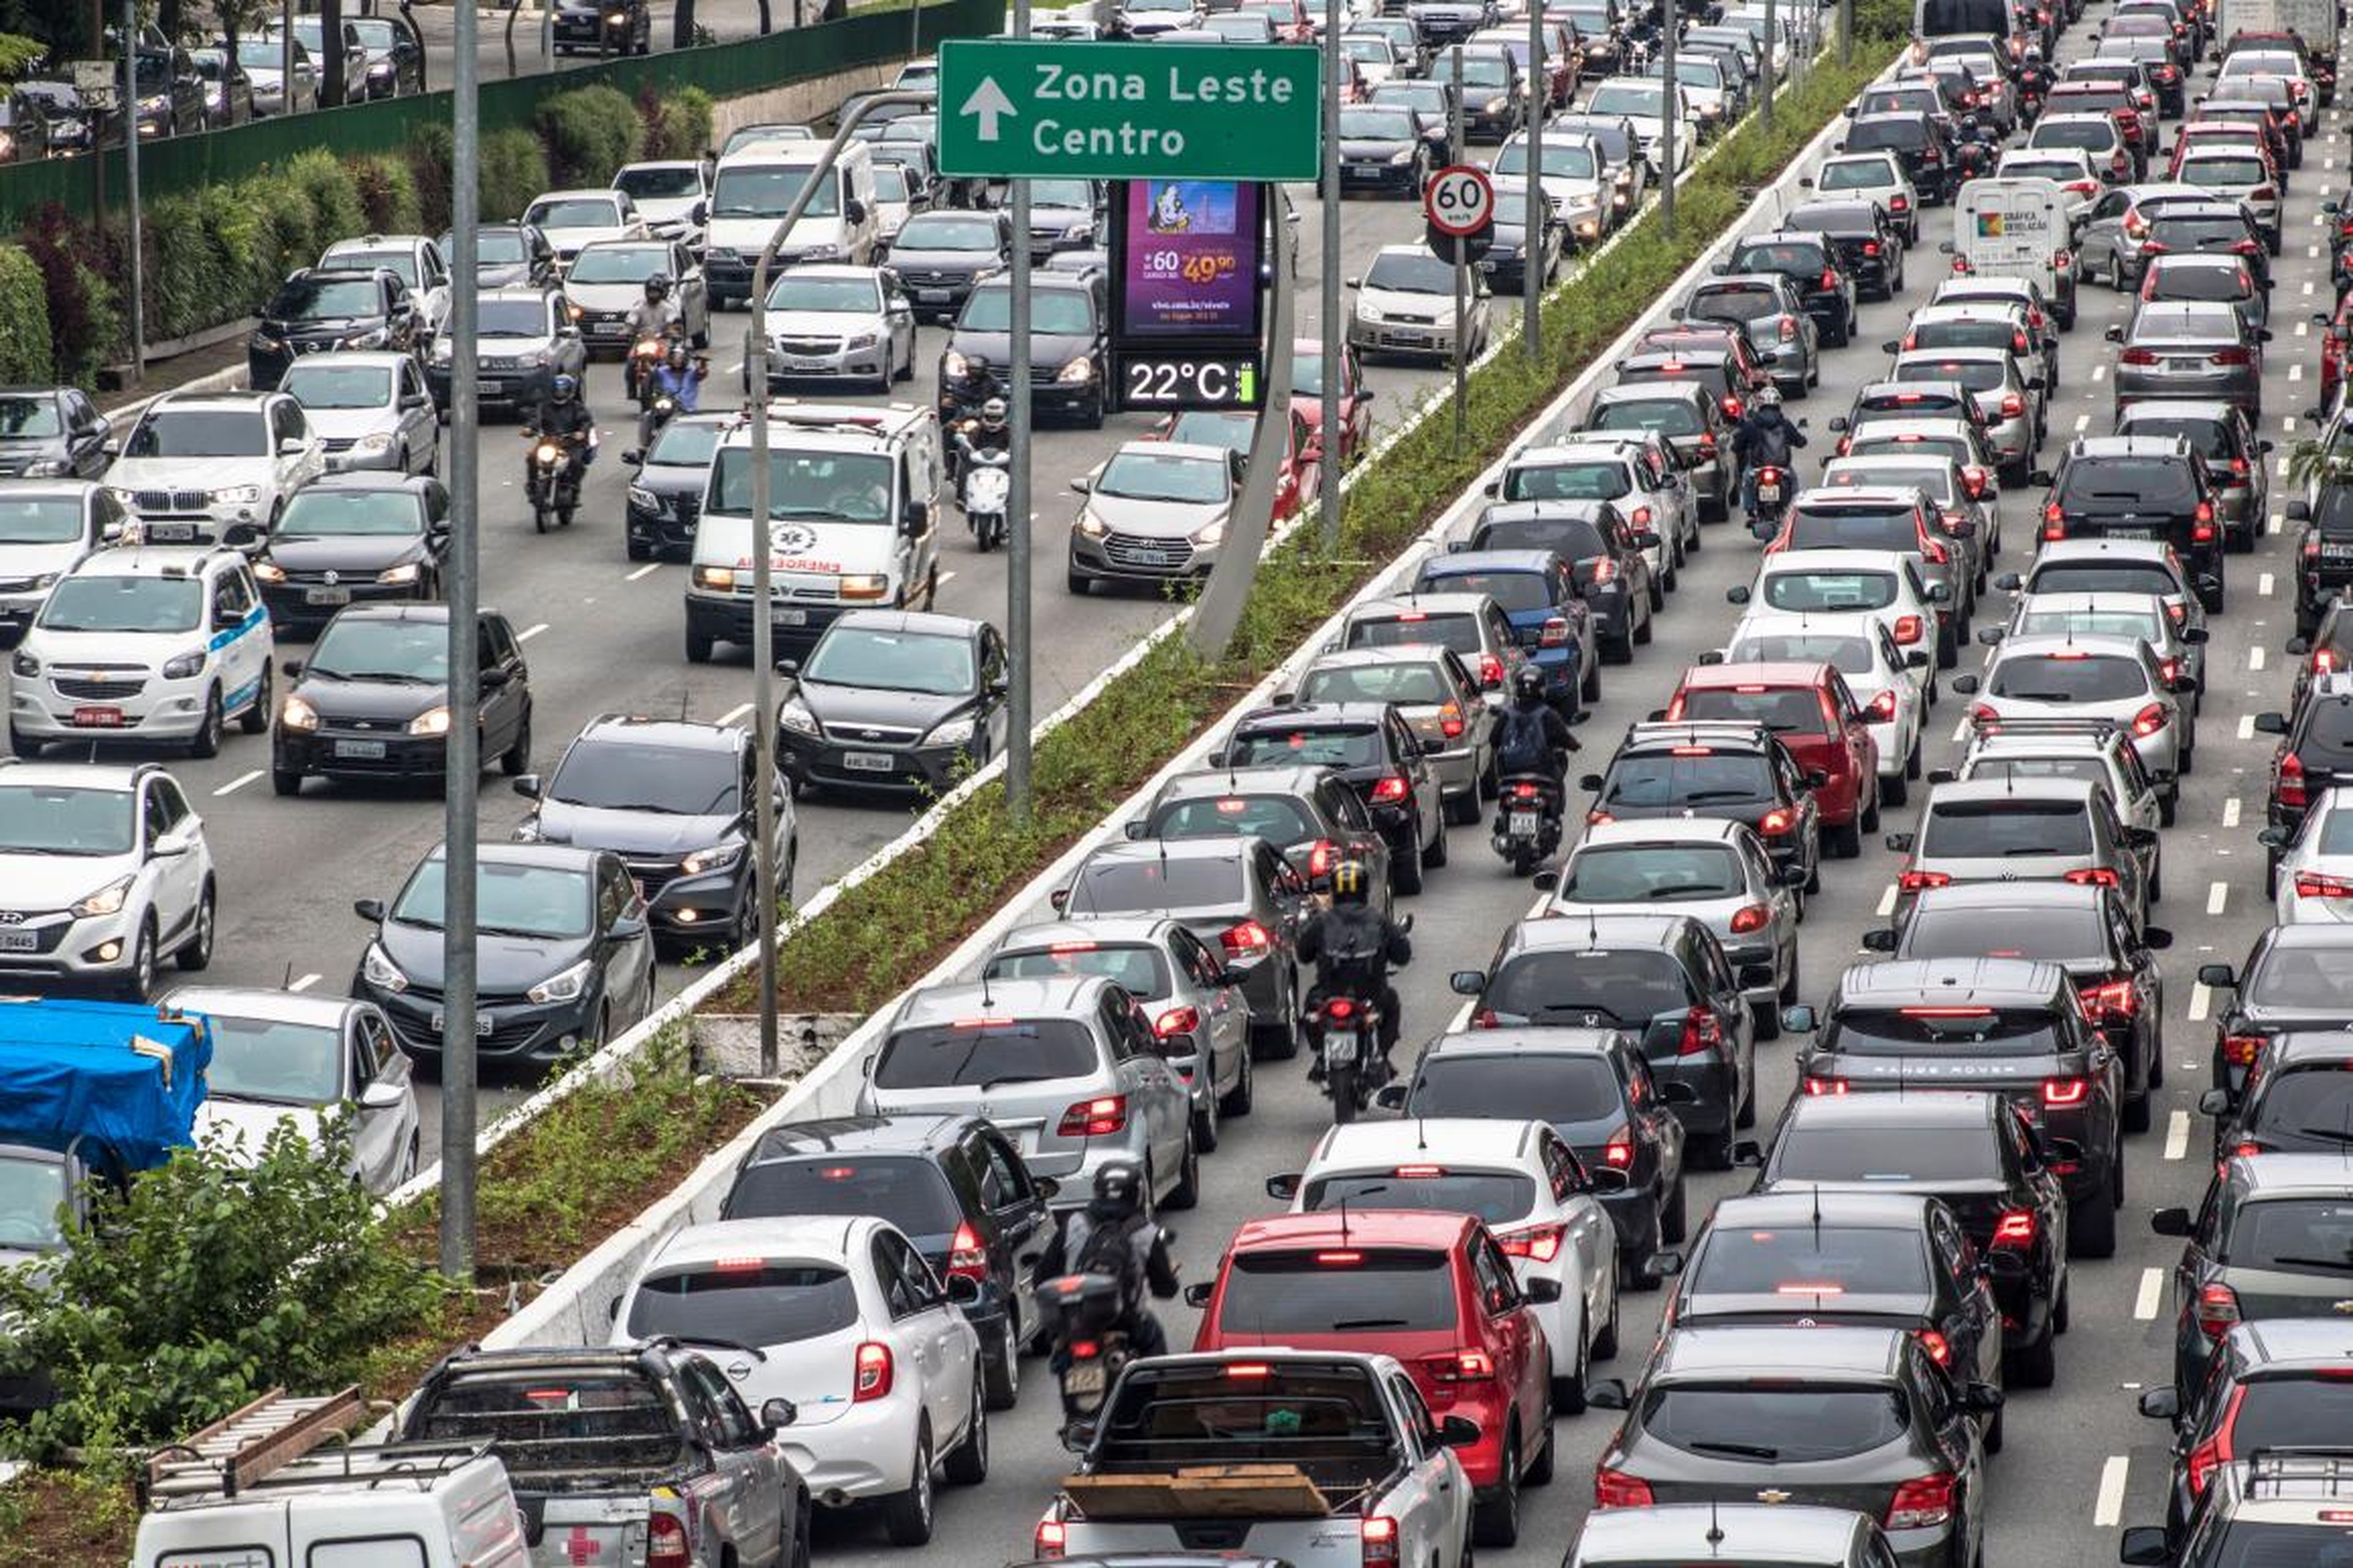 In fact, drivers spend an average of 22% of their time in congestion.